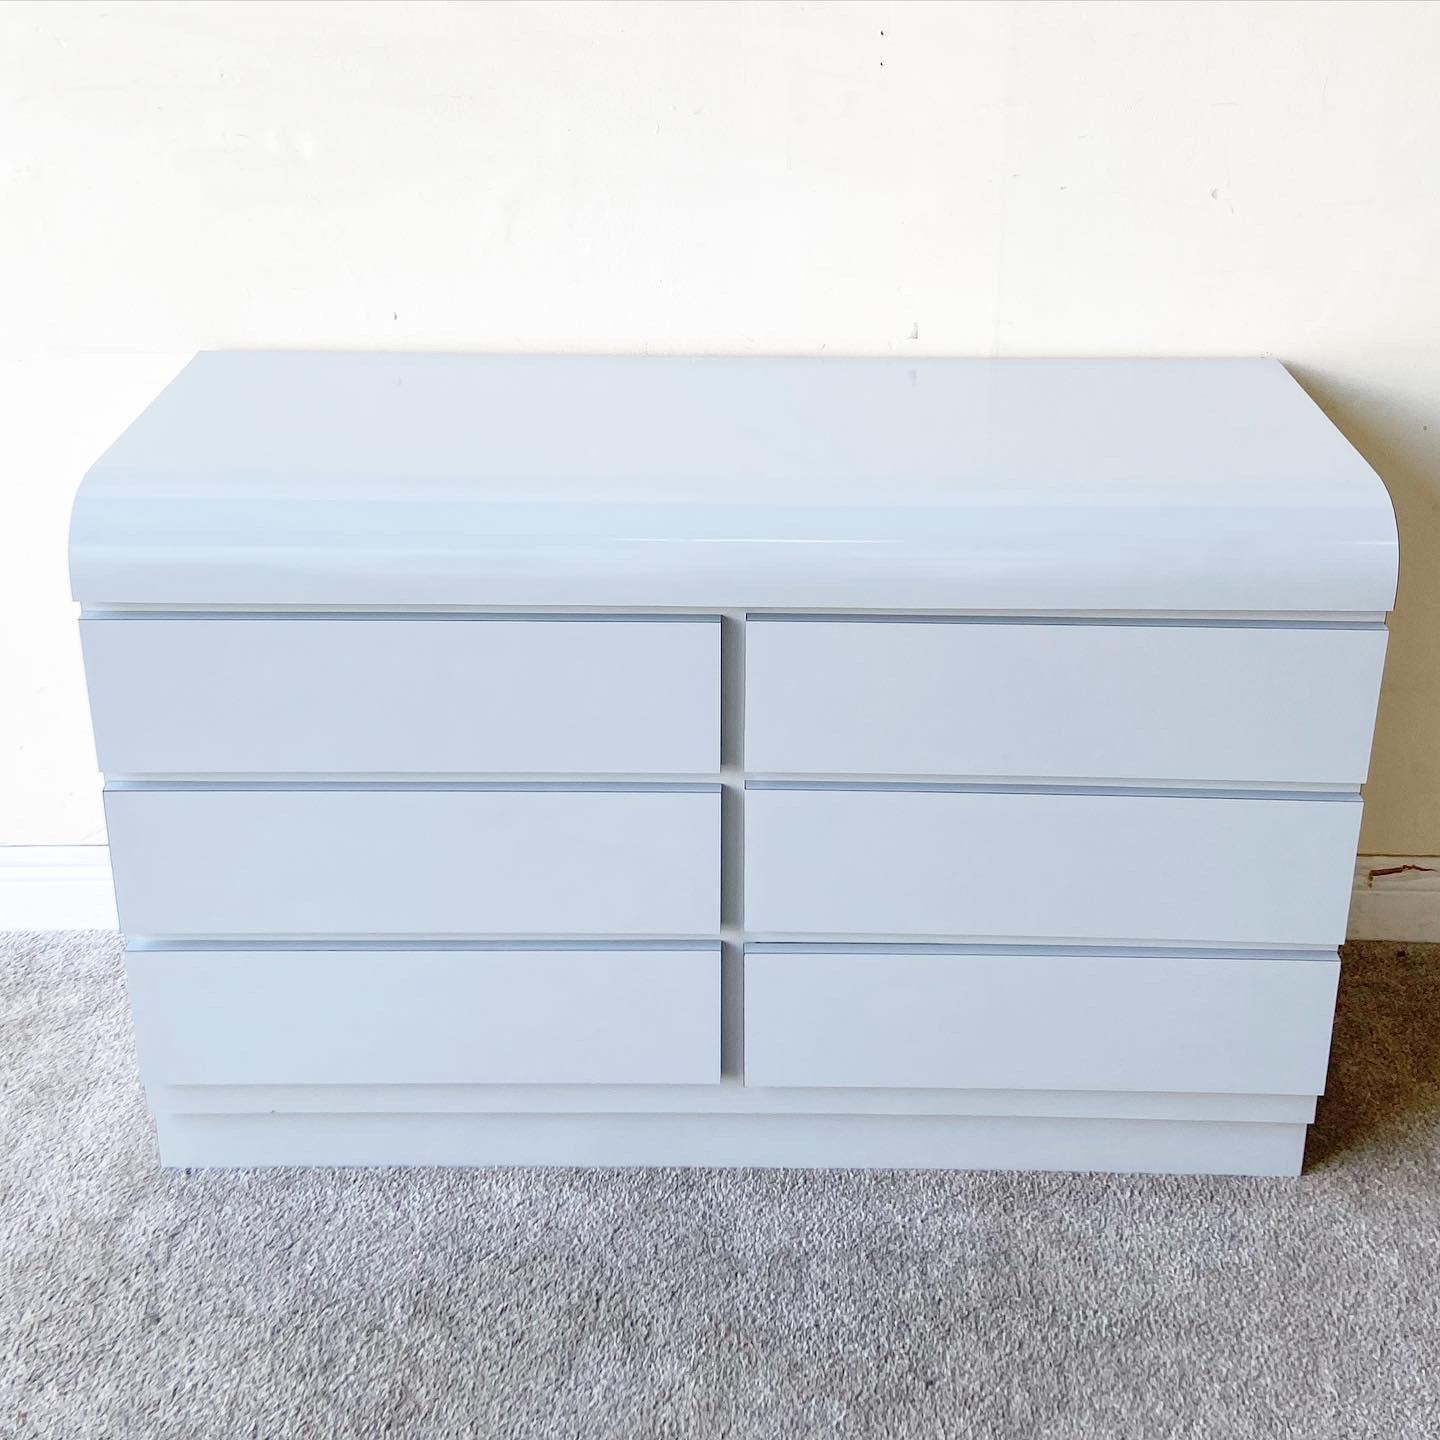 Amazing postmodern waterfall lowboy Dresser. Feature a grey lacquer laminate with 6 spacious drawers.
